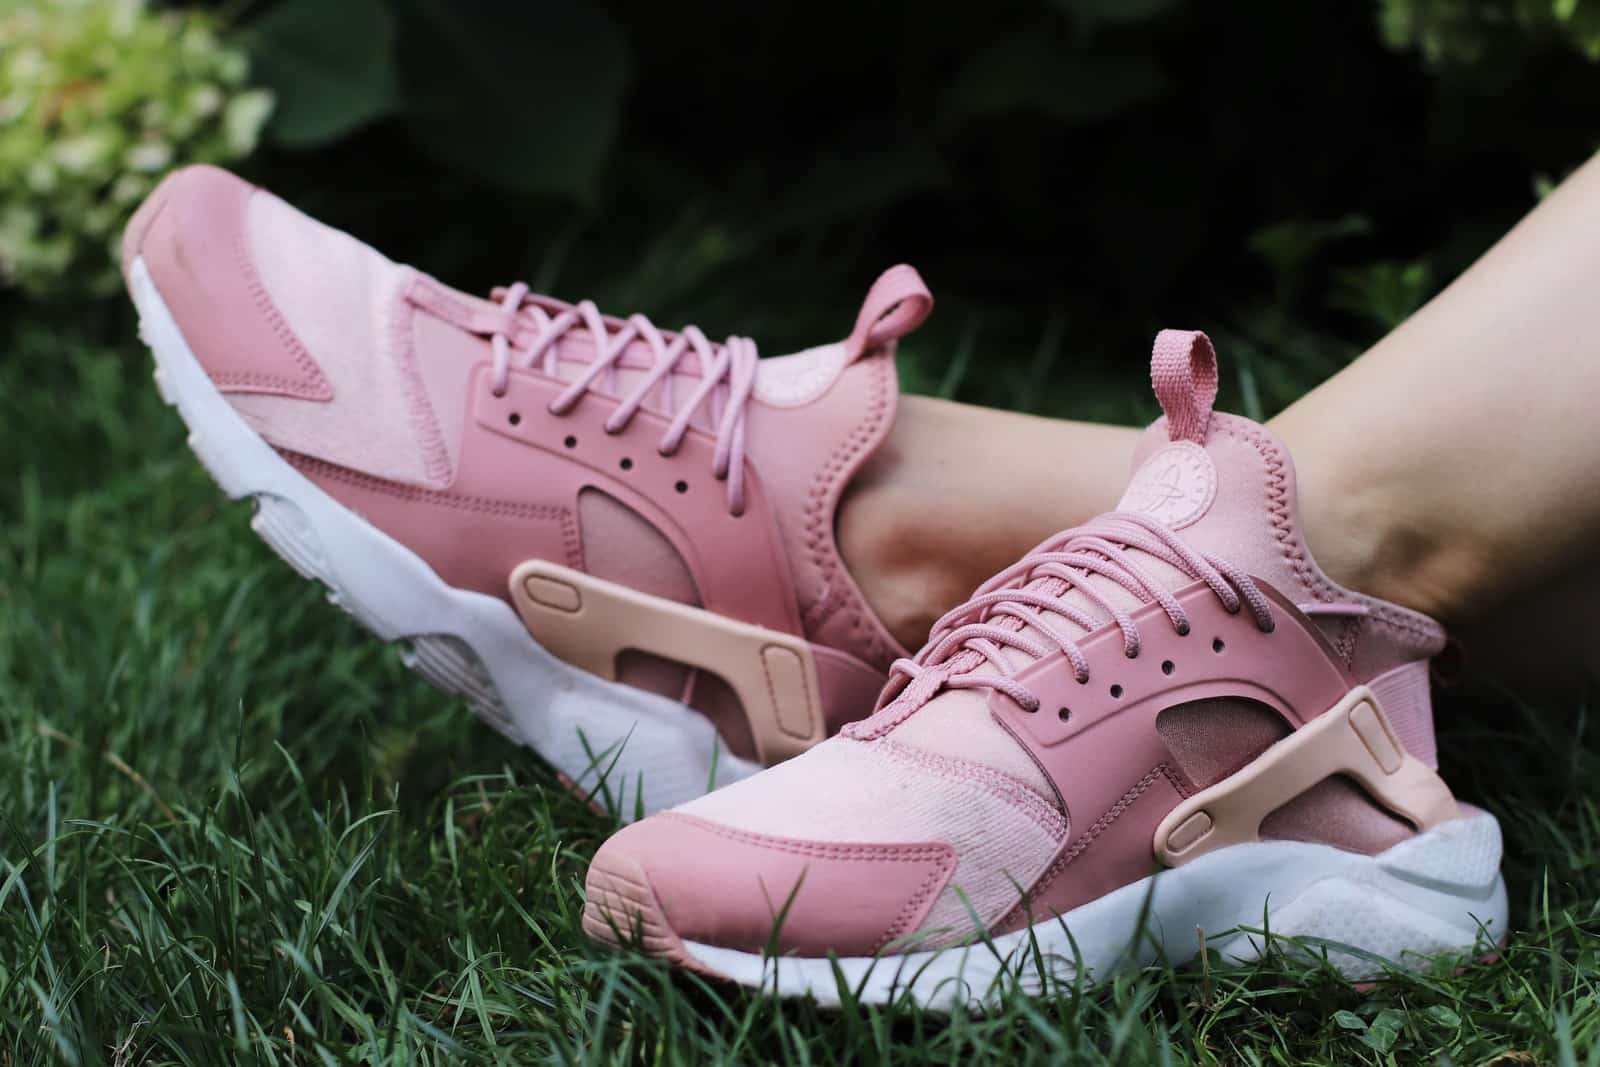 person wearing pair of pink lace up low top sneakers